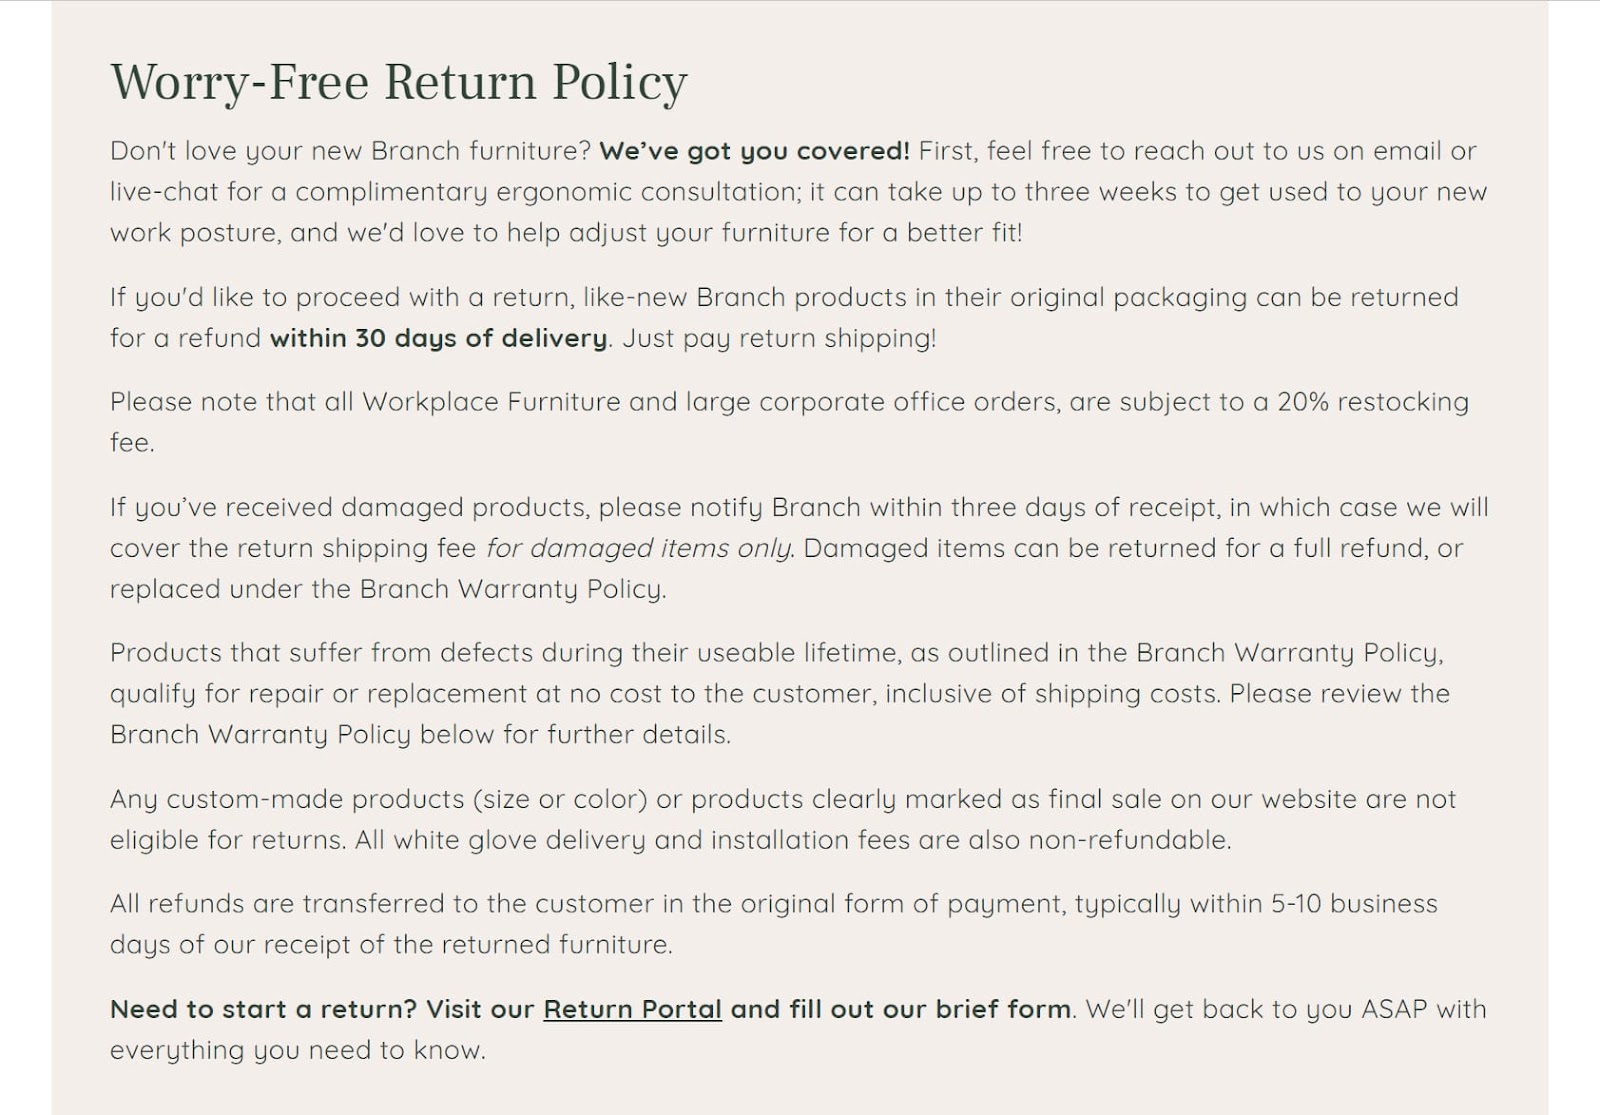 Refunds & Exchange Policy